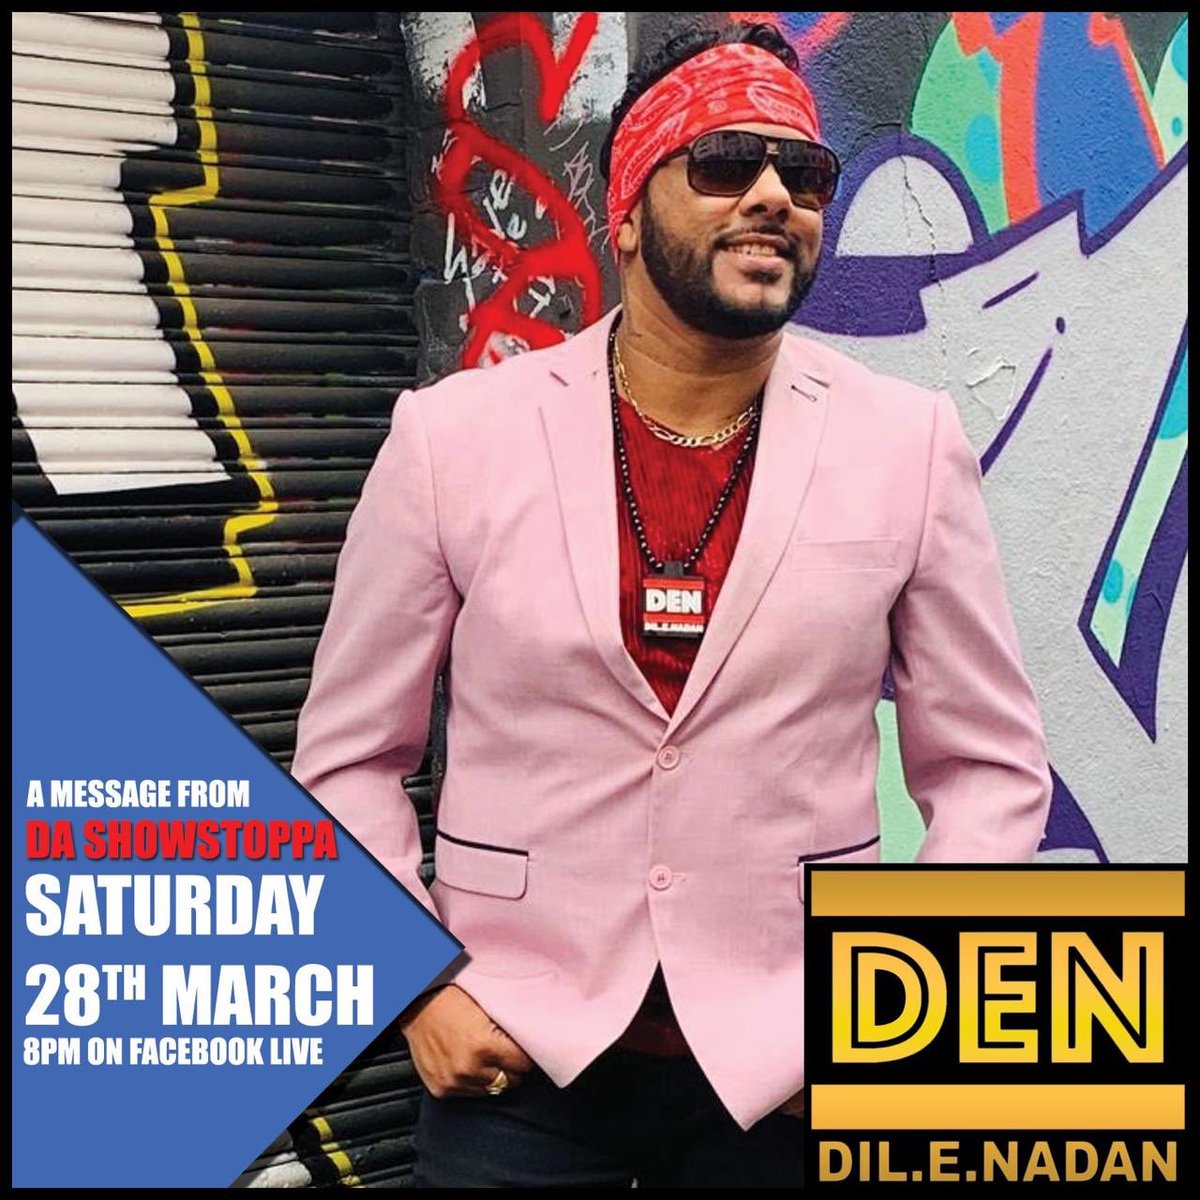 Tune in on Saturday 28th March for a live message from Da Showstoppa via his Facebook page. Please share with all your friends and family. #ourmessage #dilenadan #prayers